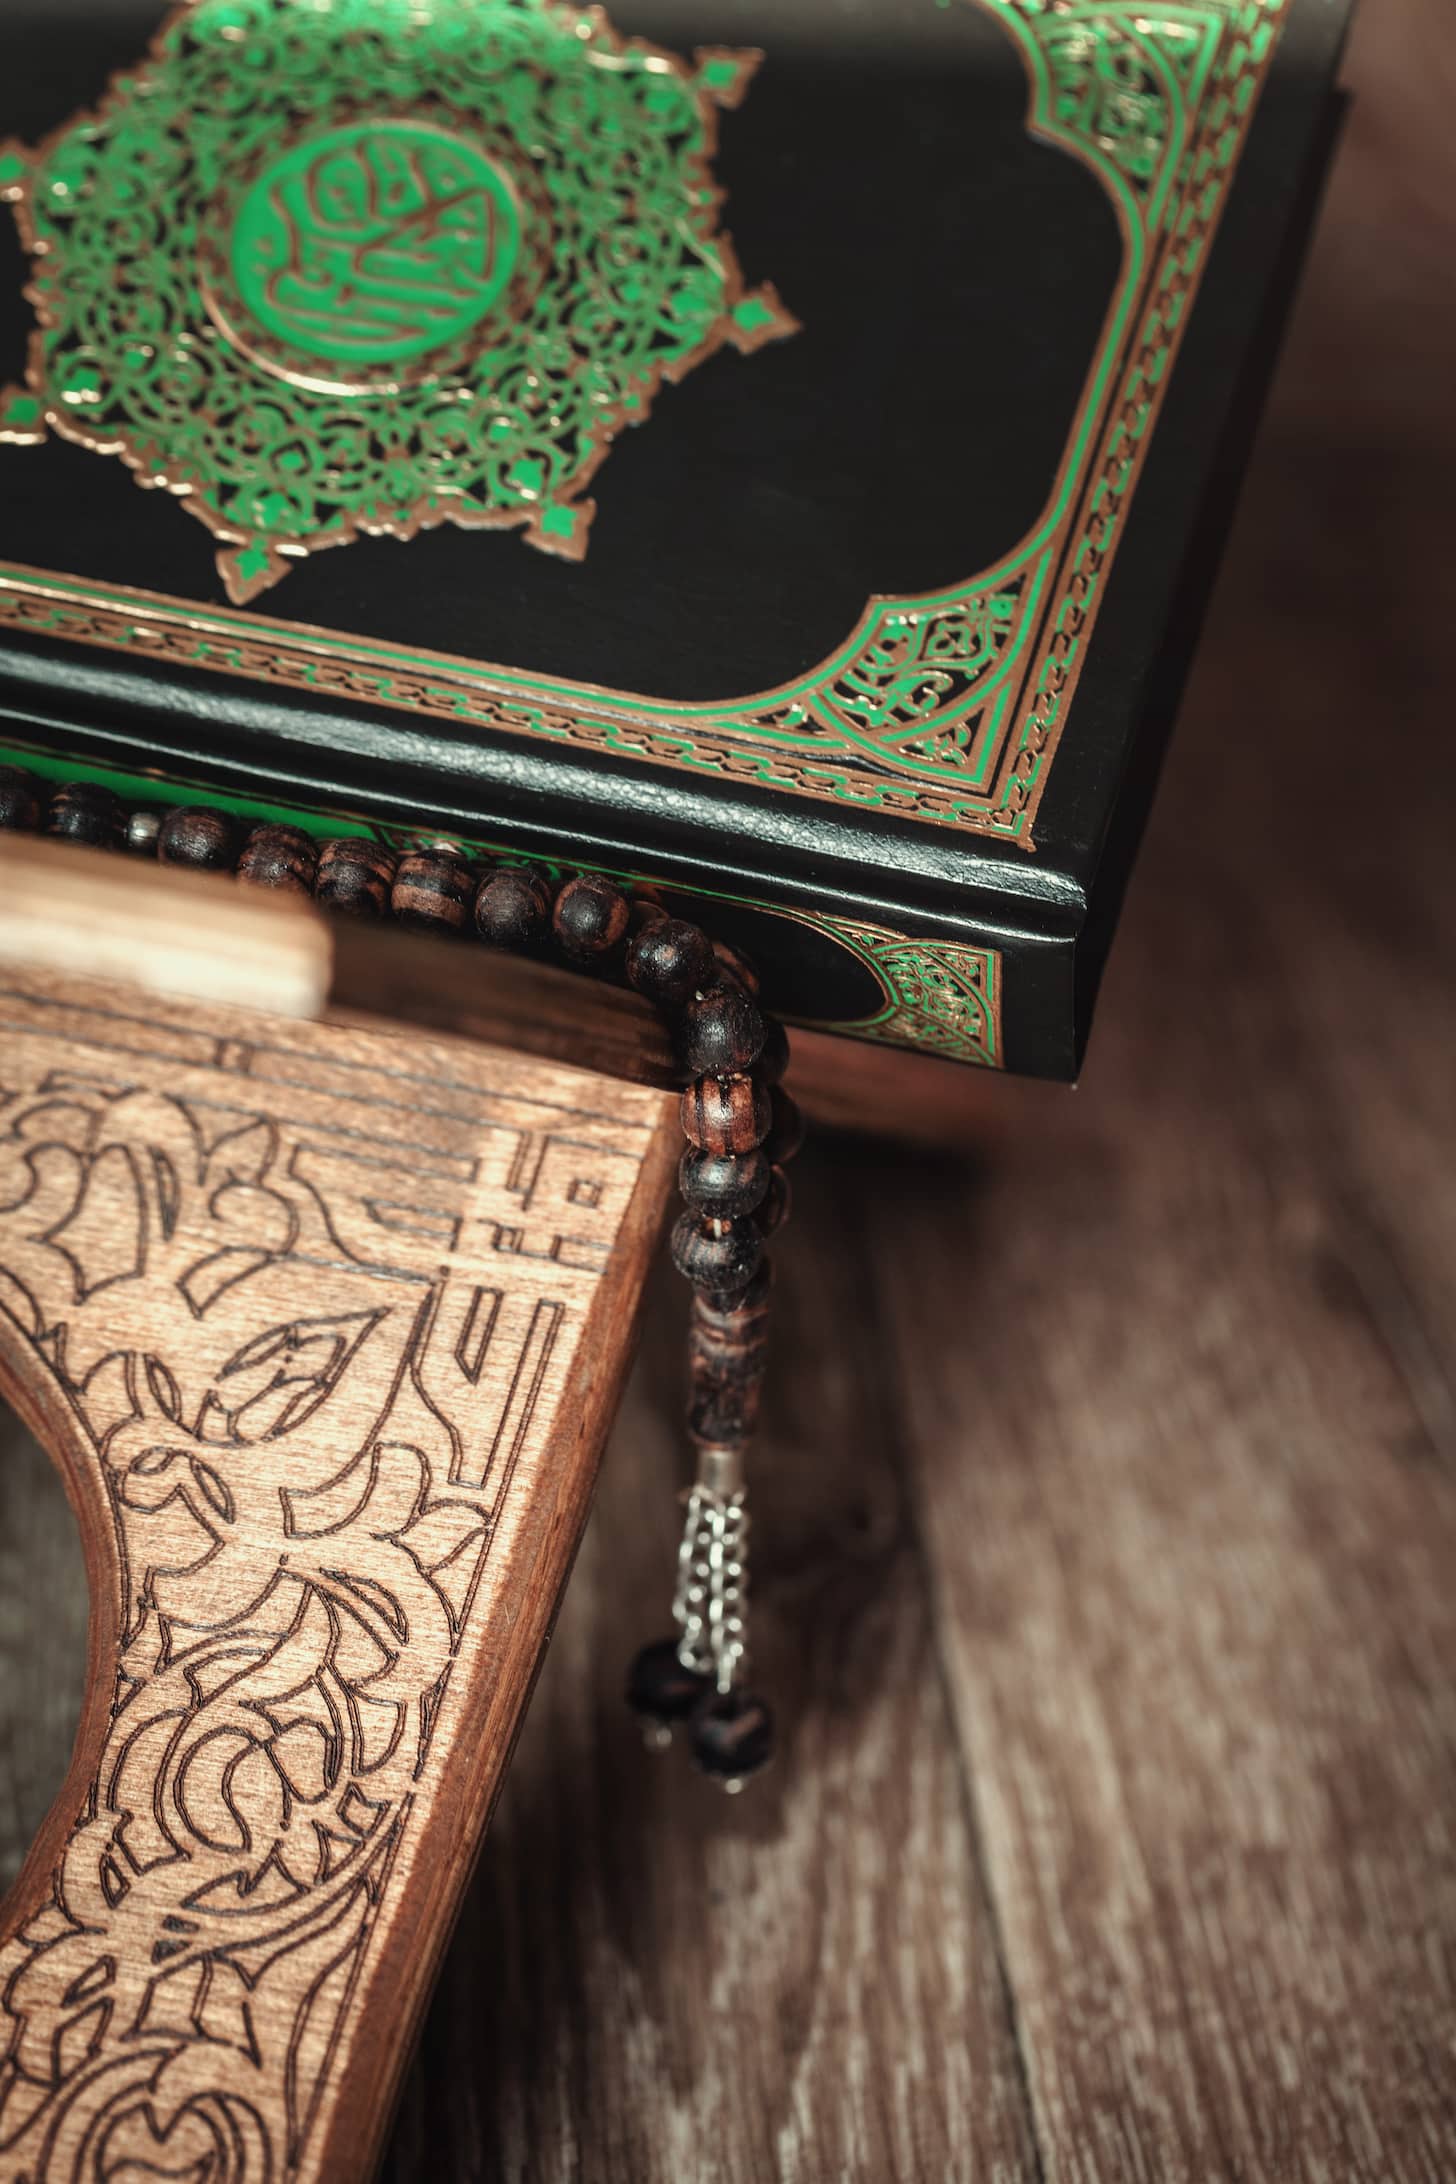 The holy book of the Koran on the stand